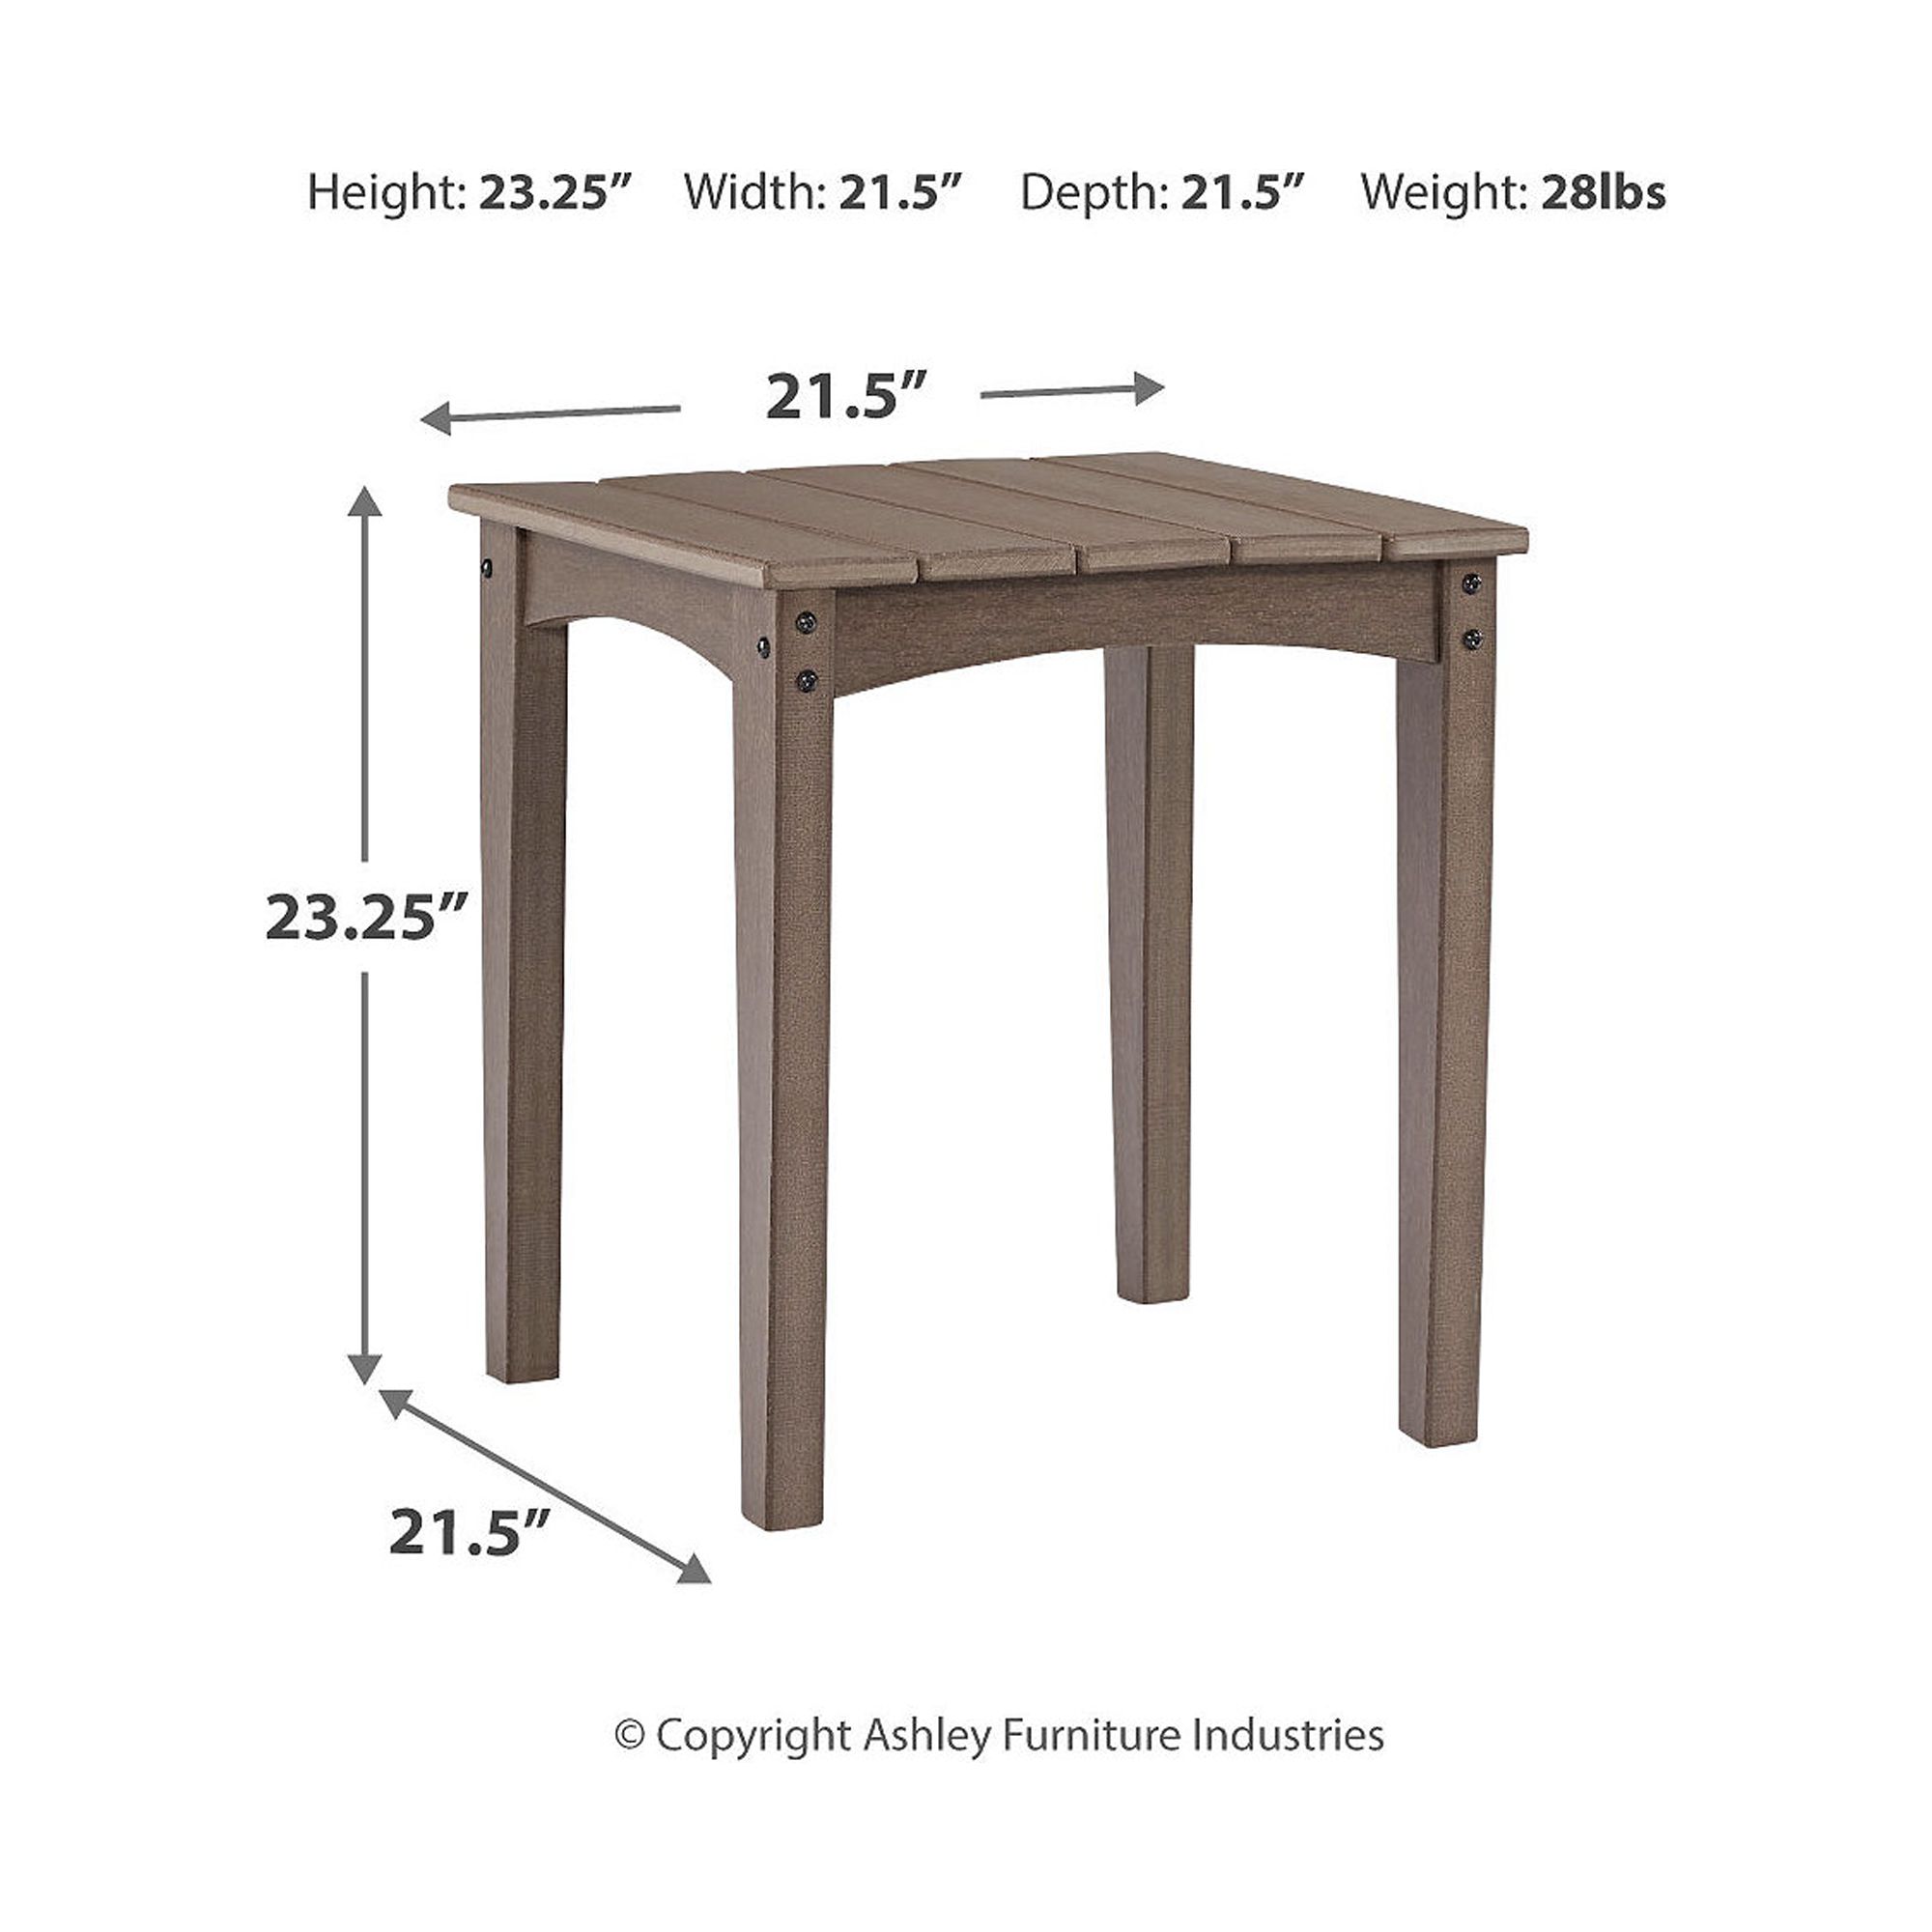 Signature Design by Ashley Casual Emmeline Outdoor HDPE Patio End Table, Brown - image 5 of 5